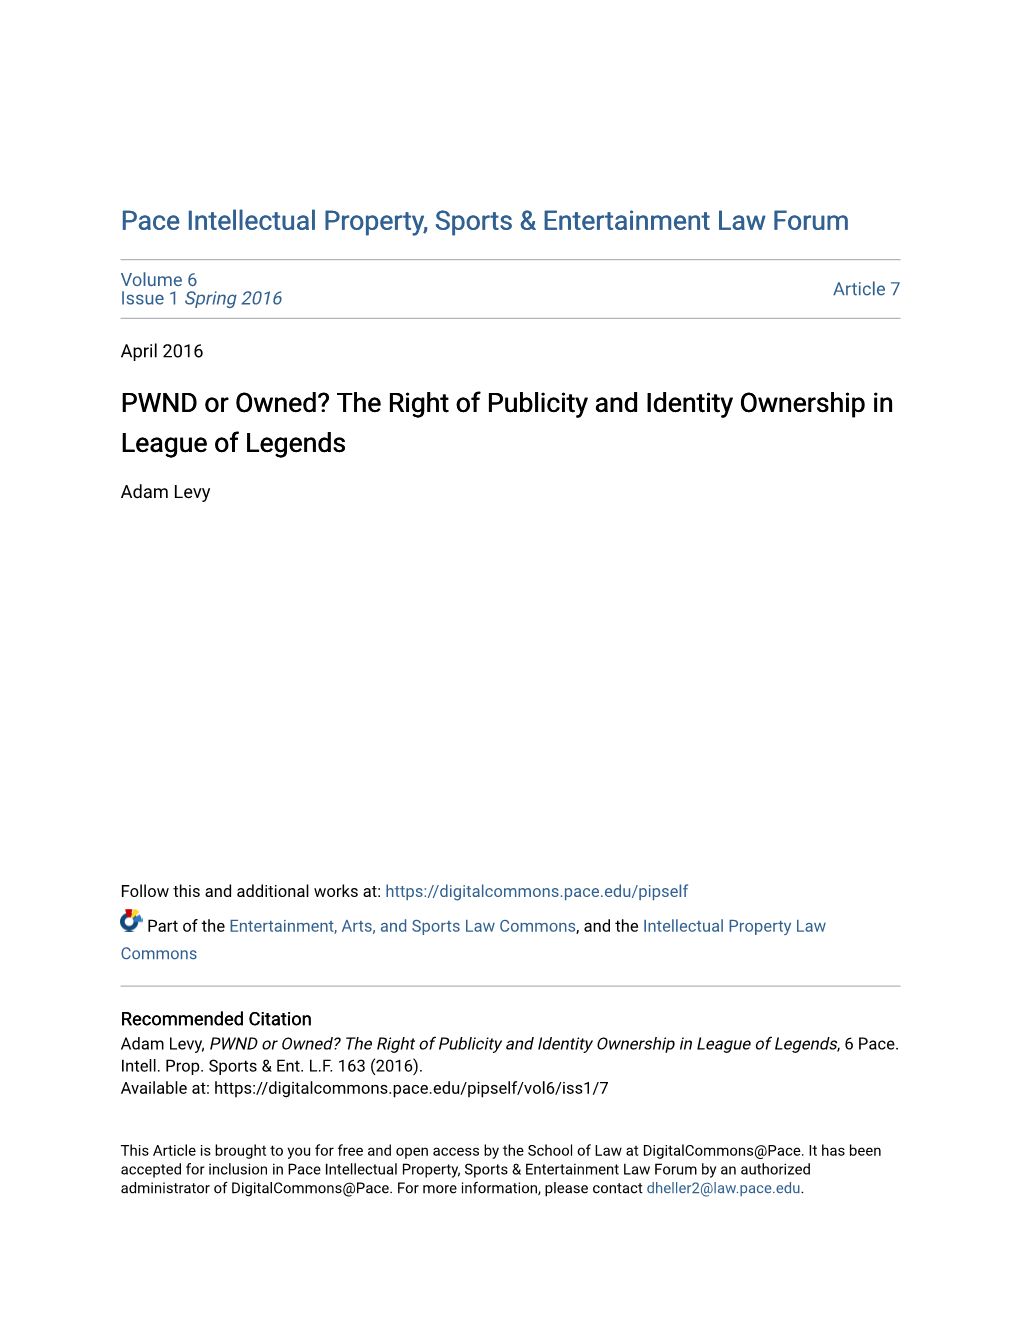 The Right of Publicity and Identity Ownership in League of Legends